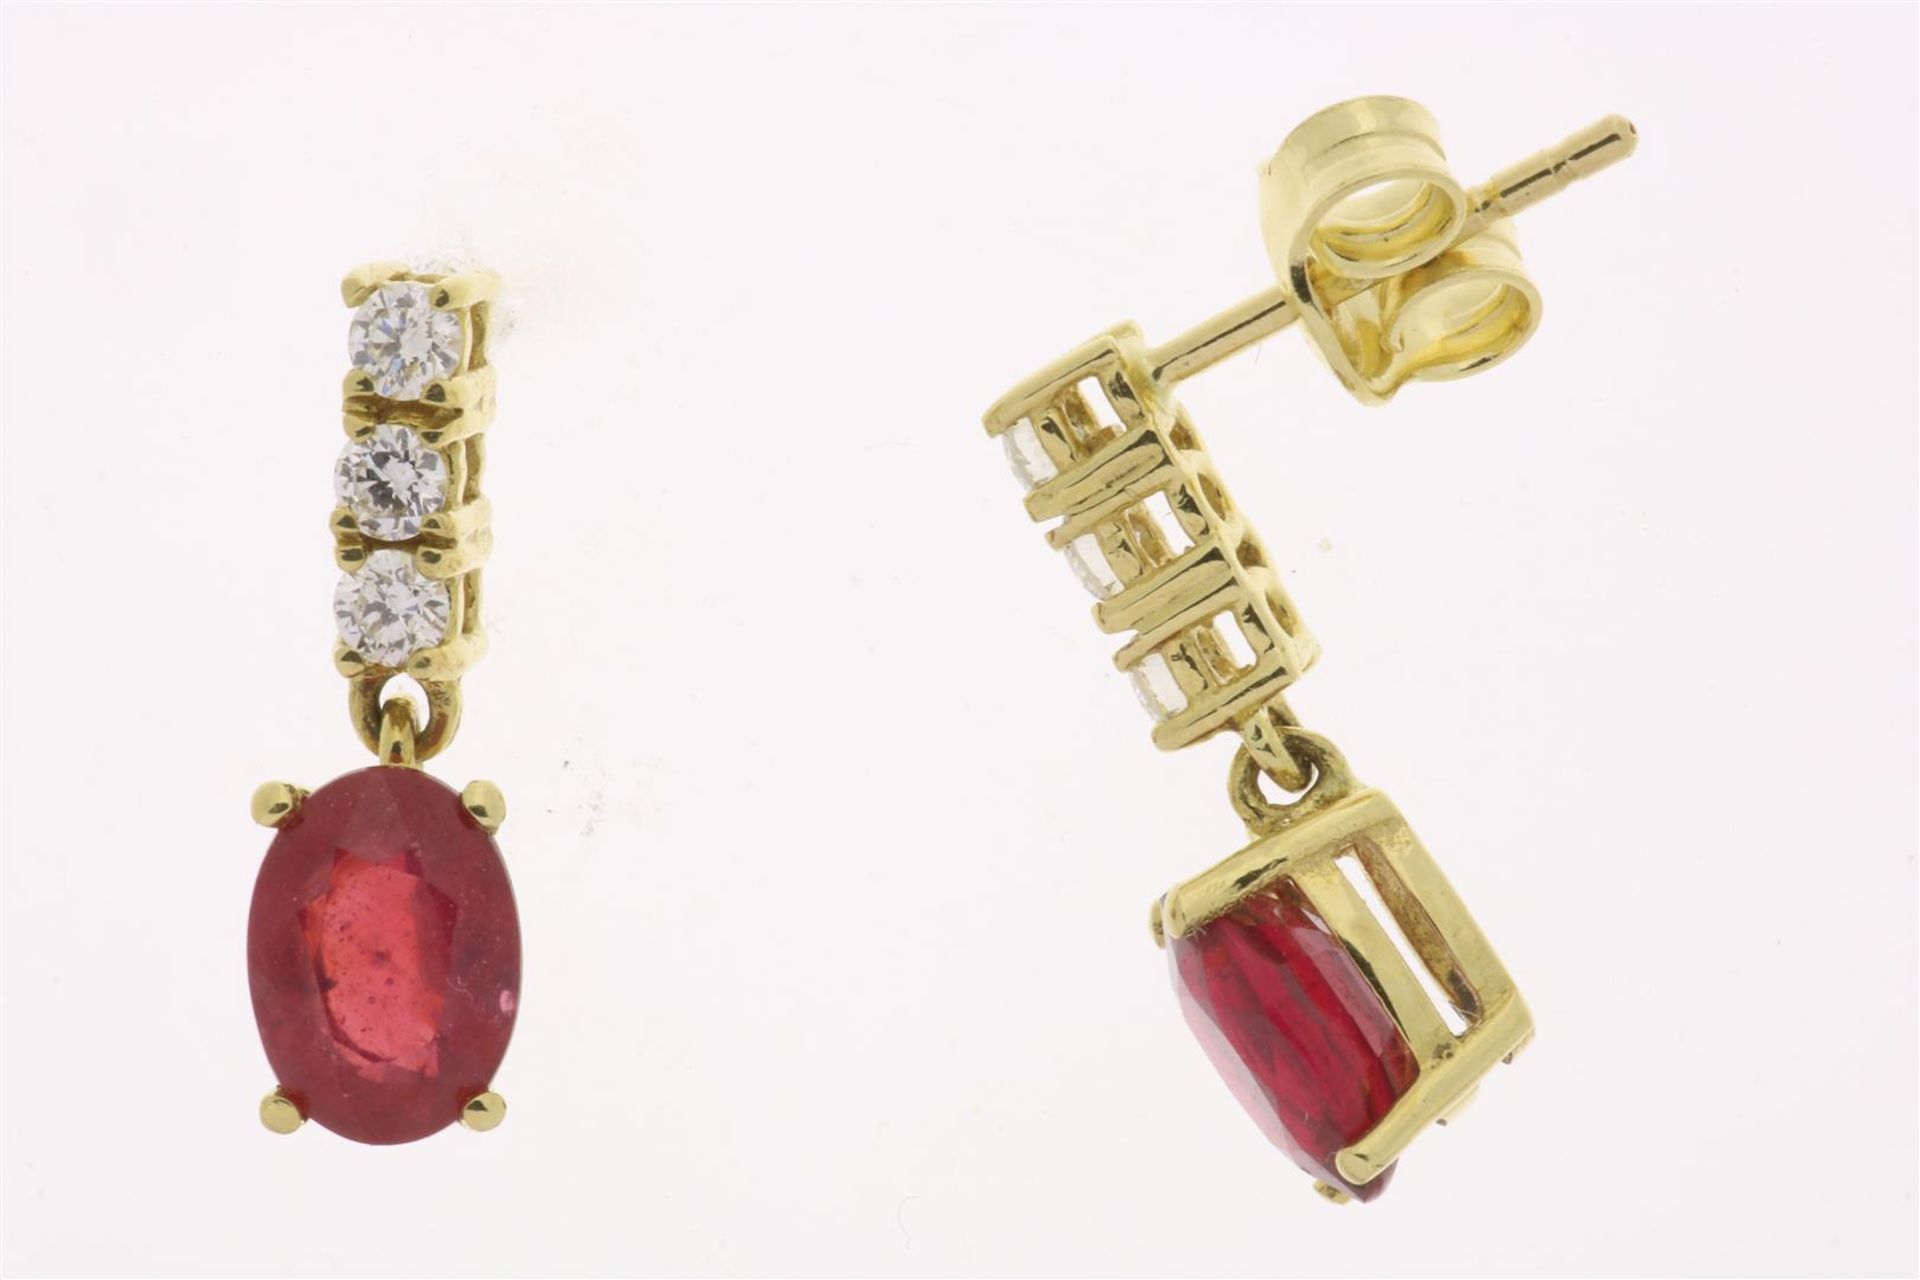 Yellow gold ear hangers with ruby and diamond